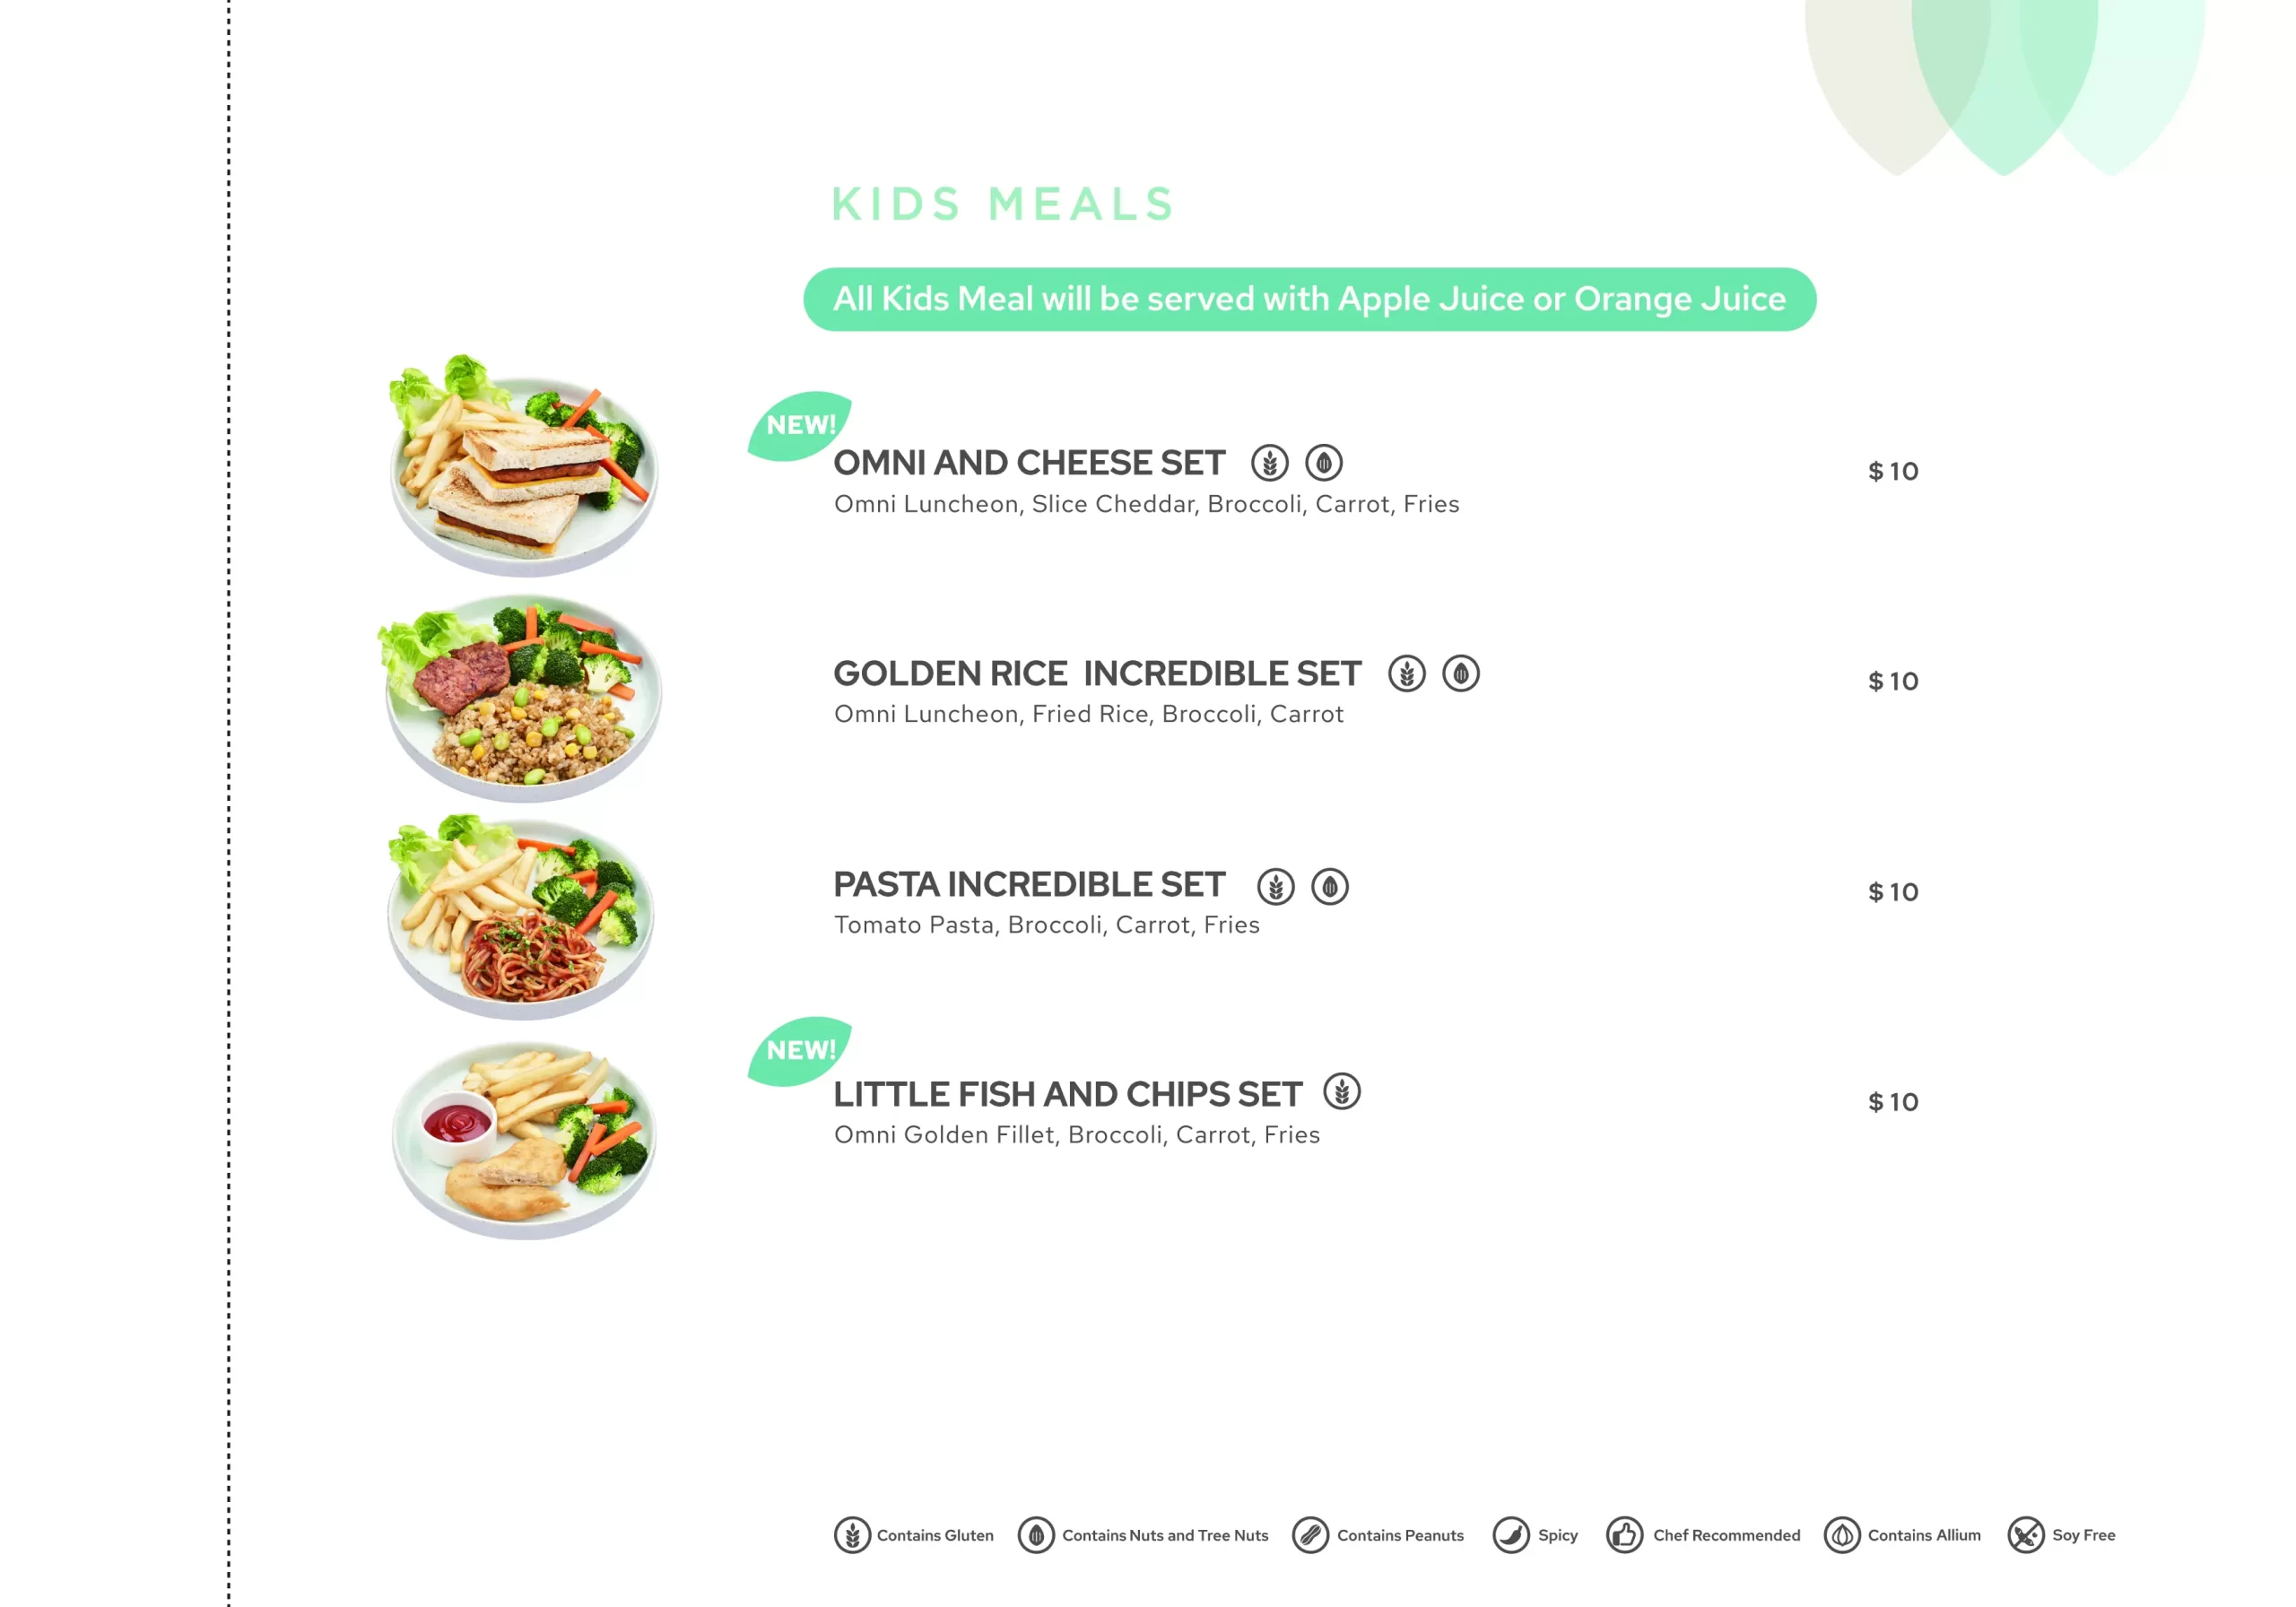 Green Common kids meal